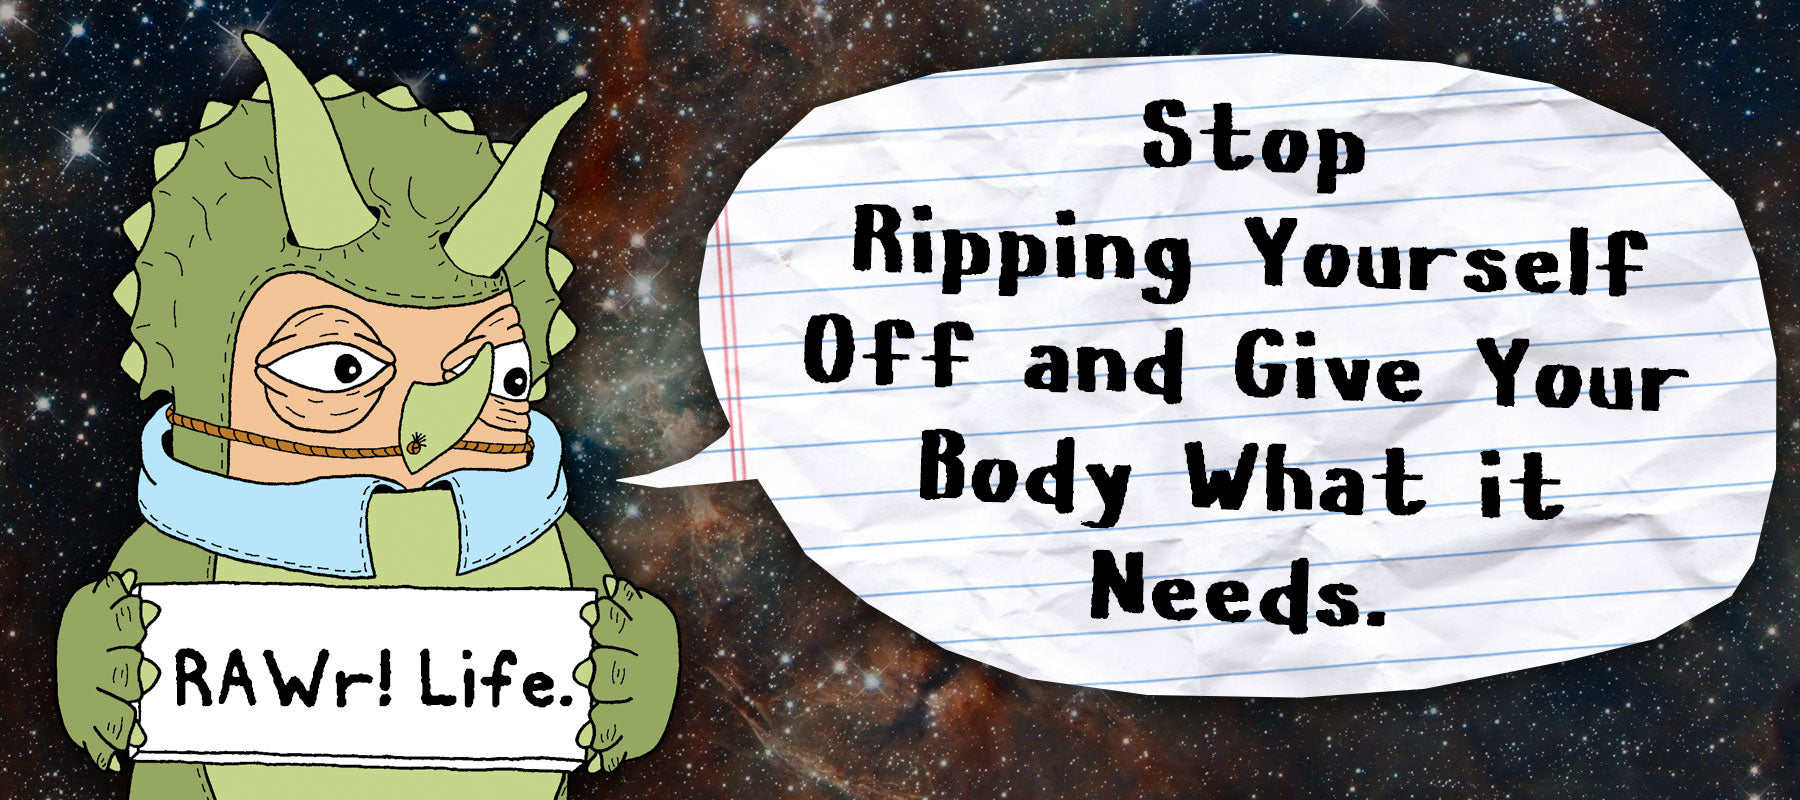 rawr life stop ripping yourself off and give your body what it needs